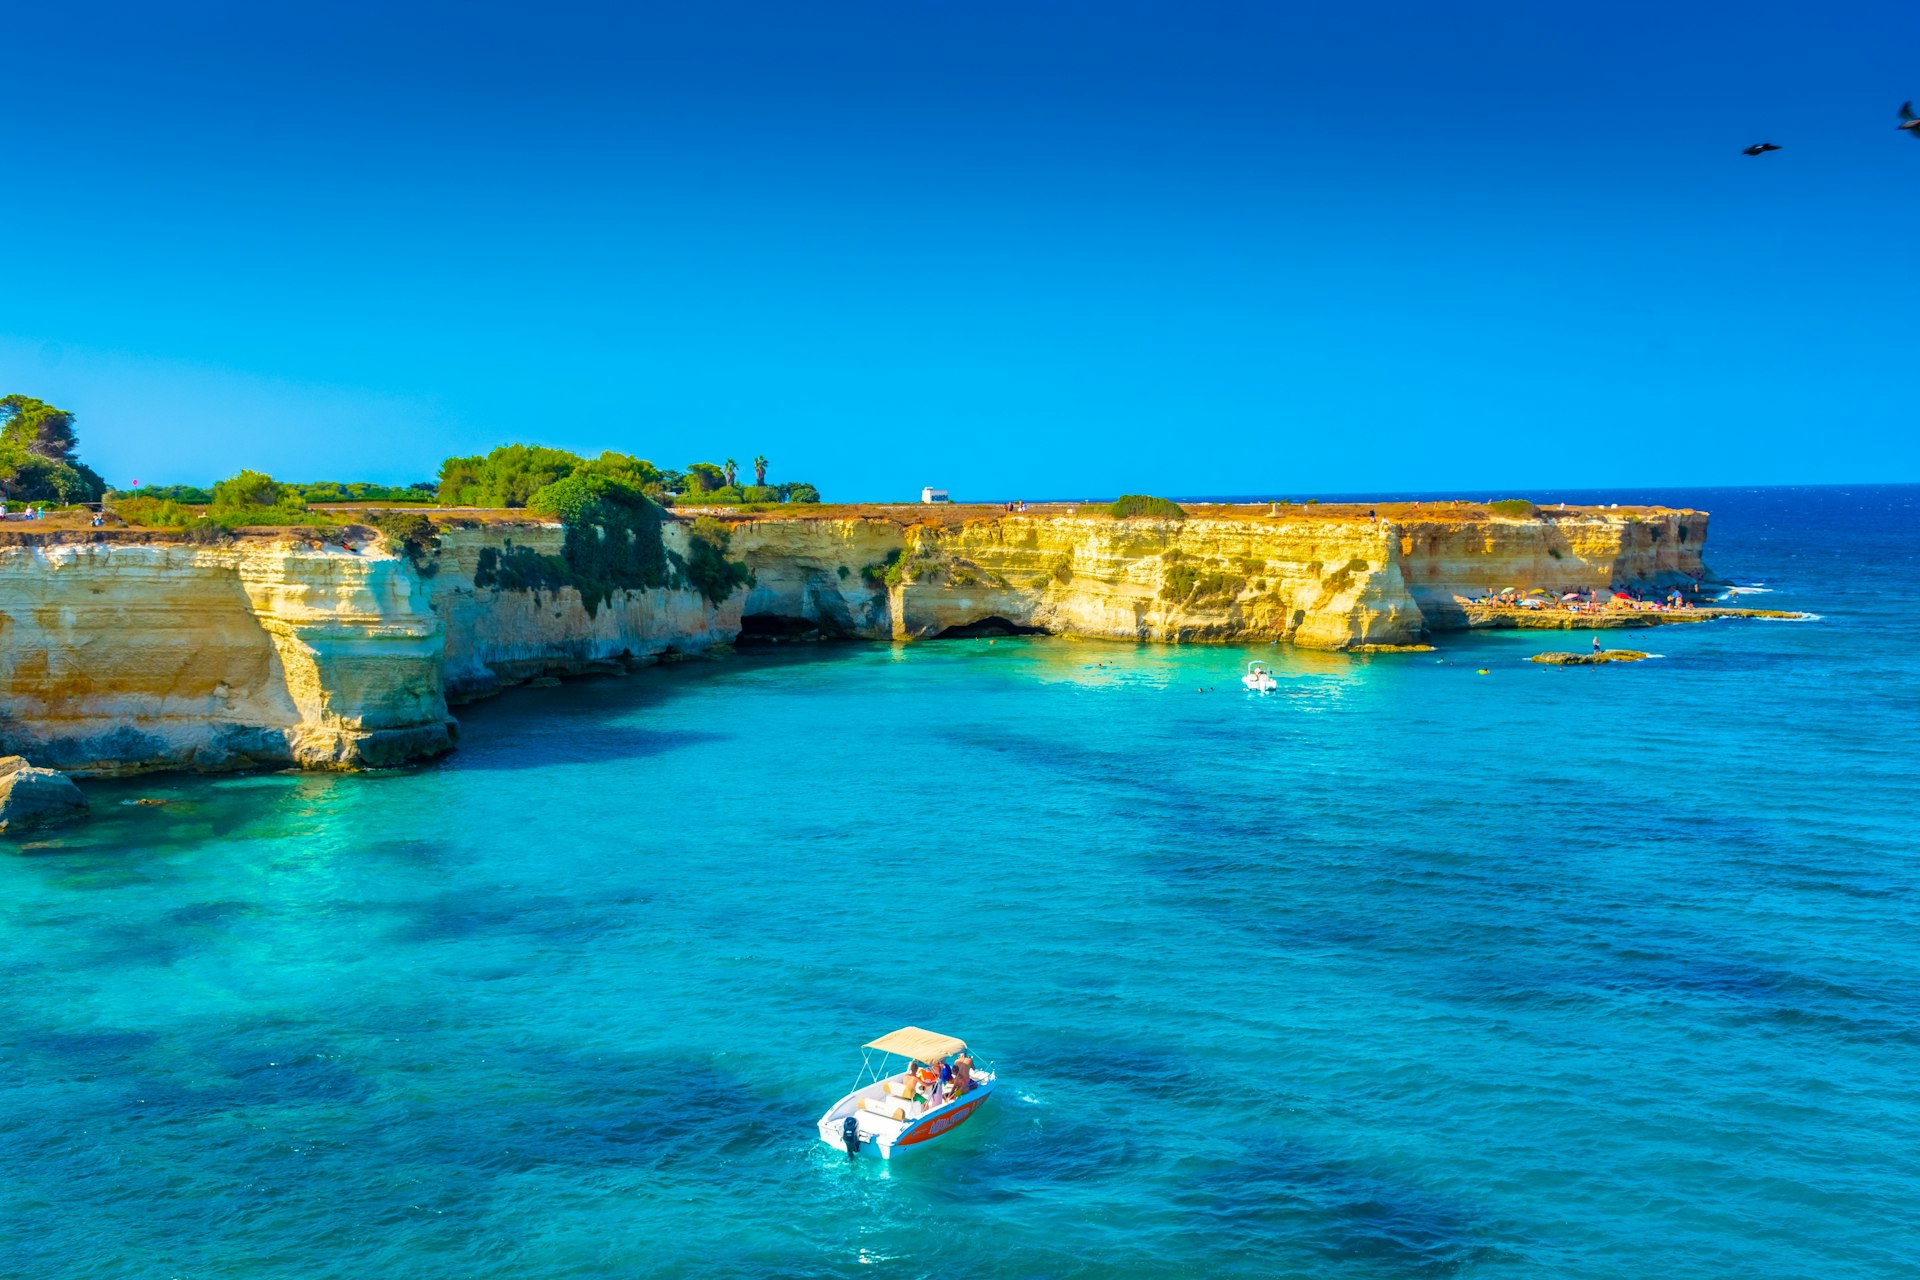 A boat sails by rocky cliffs in the waters off Torre Sant’Andrea, Puglia, Italy